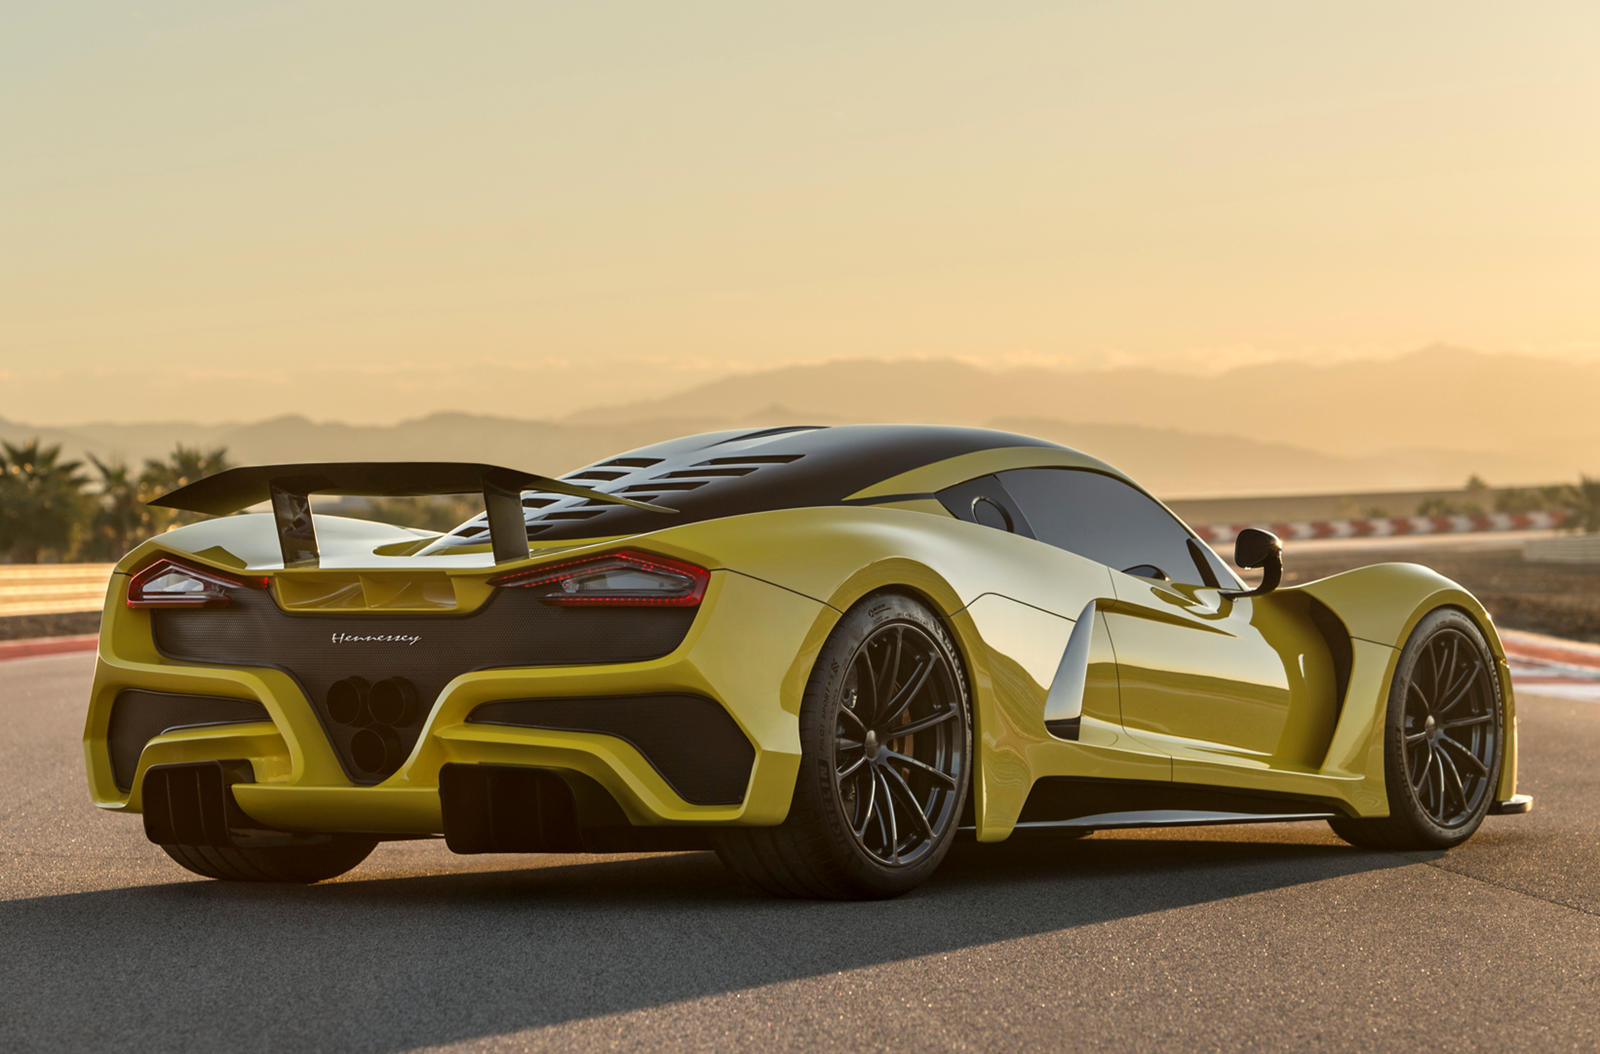 Walkaround Of Sold Out $2.1M Hennessey Venom F5, Just 24 Will Be Built